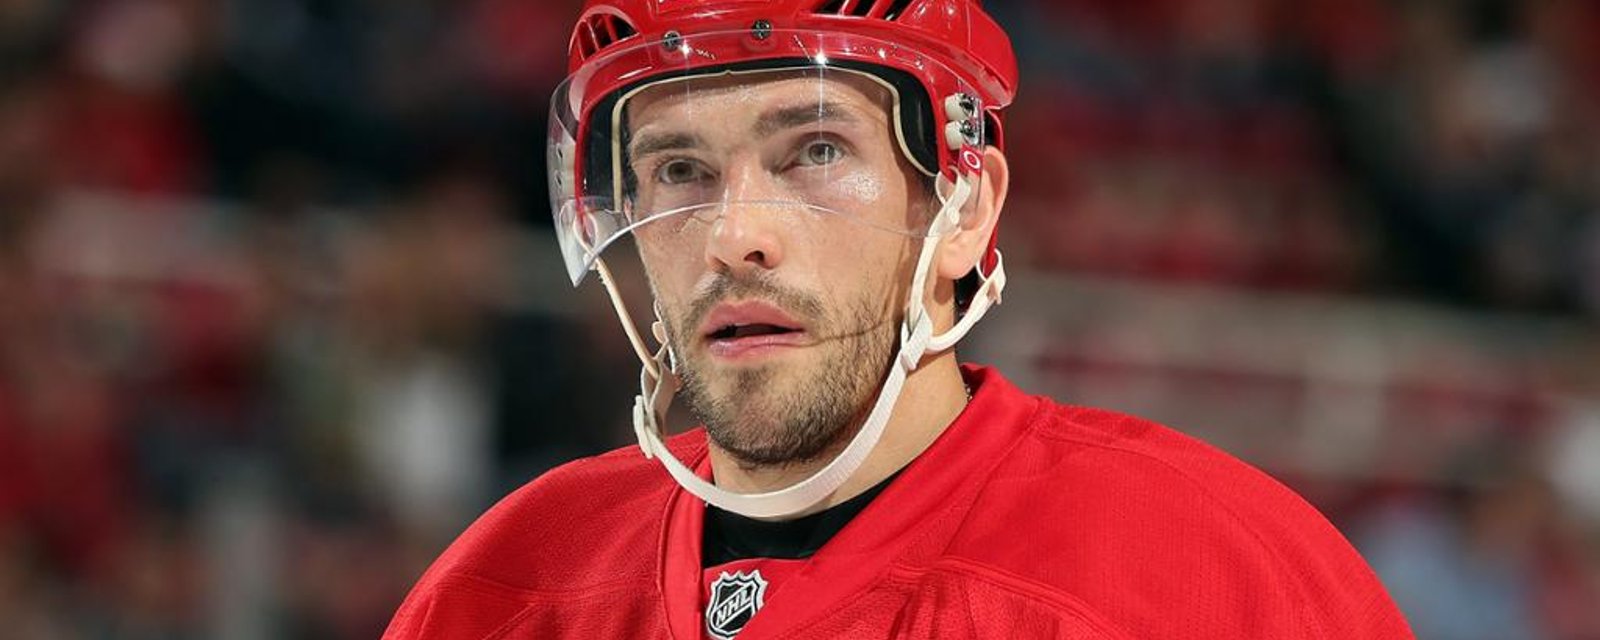 Datsyuk coming back to Detroit for important meeting after career ended with KHL team 